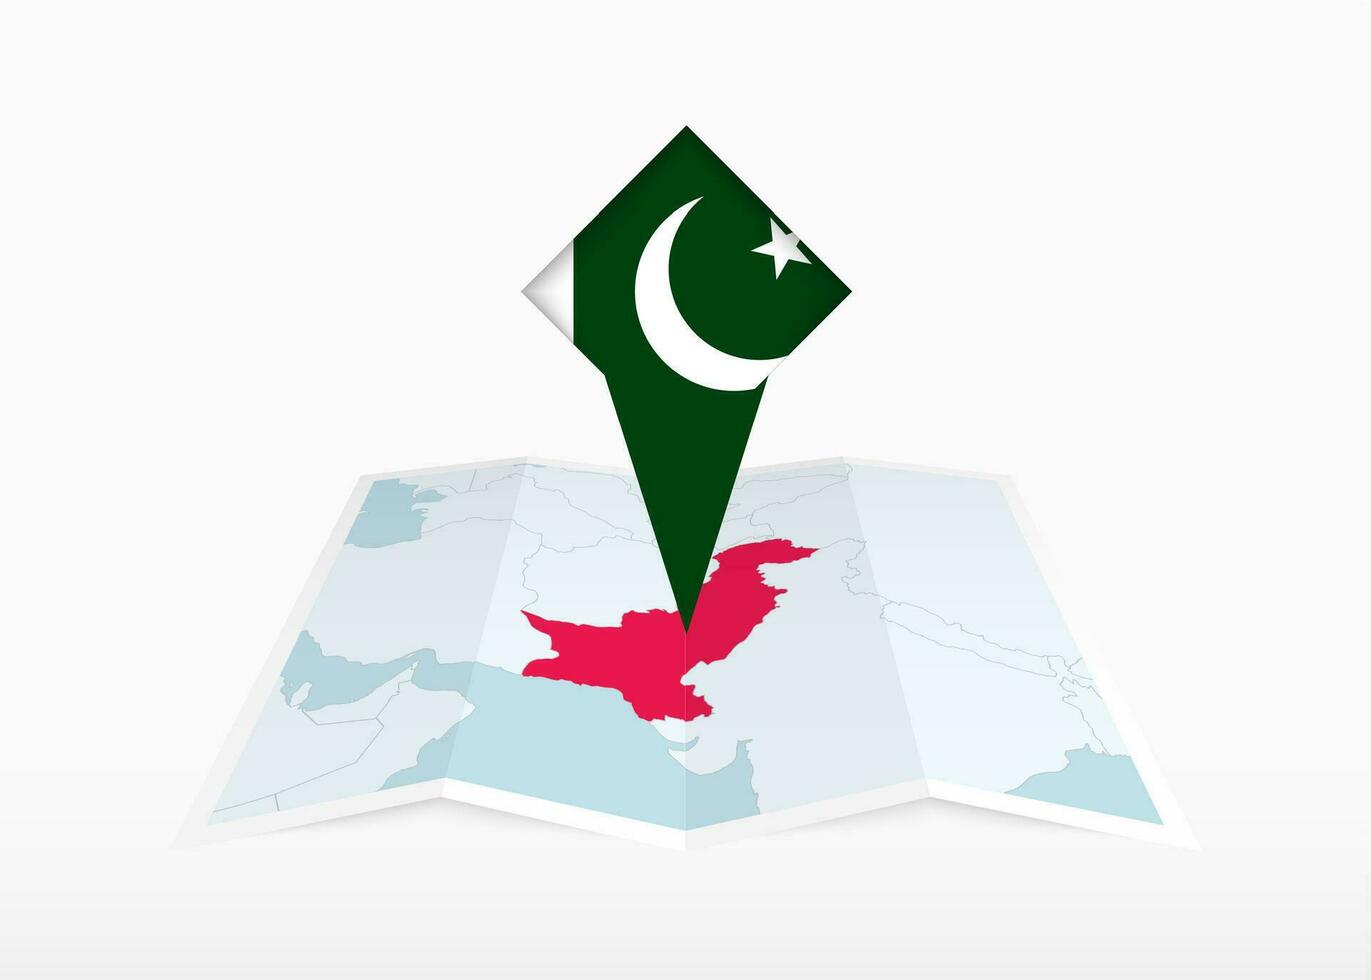 Pakistan is depicted on a folded paper map and pinned location marker with flag of Pakistan. vector